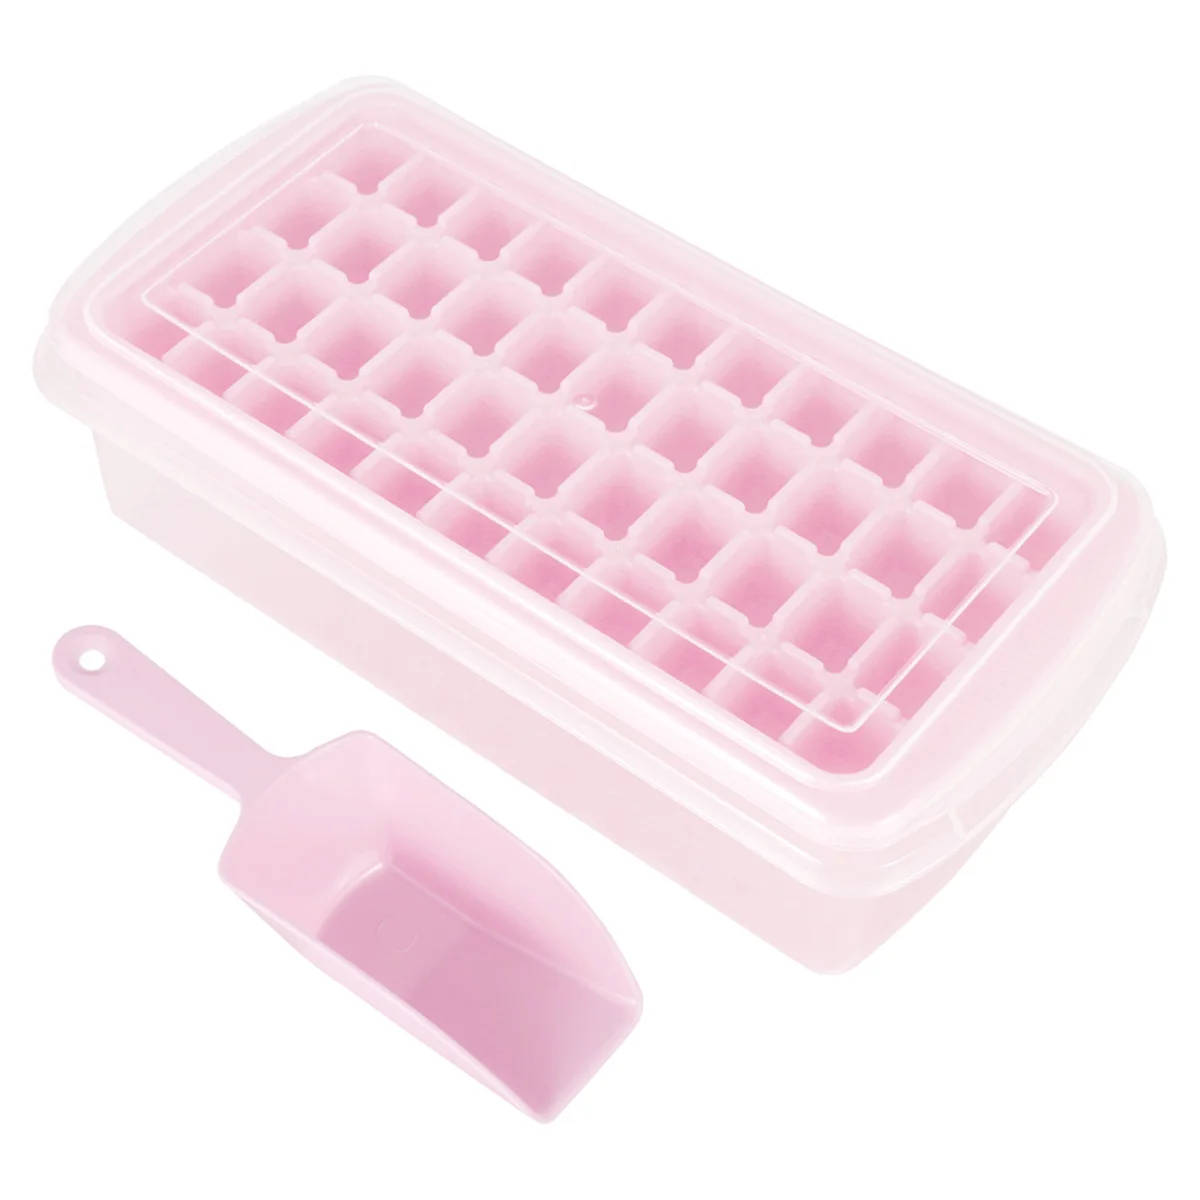 36/44 Grid Ice Box with Lid Homemade Ice Artifact Household Small Freezer Refrigerator Frozen Ice Cube Mold Kitchen Accessories